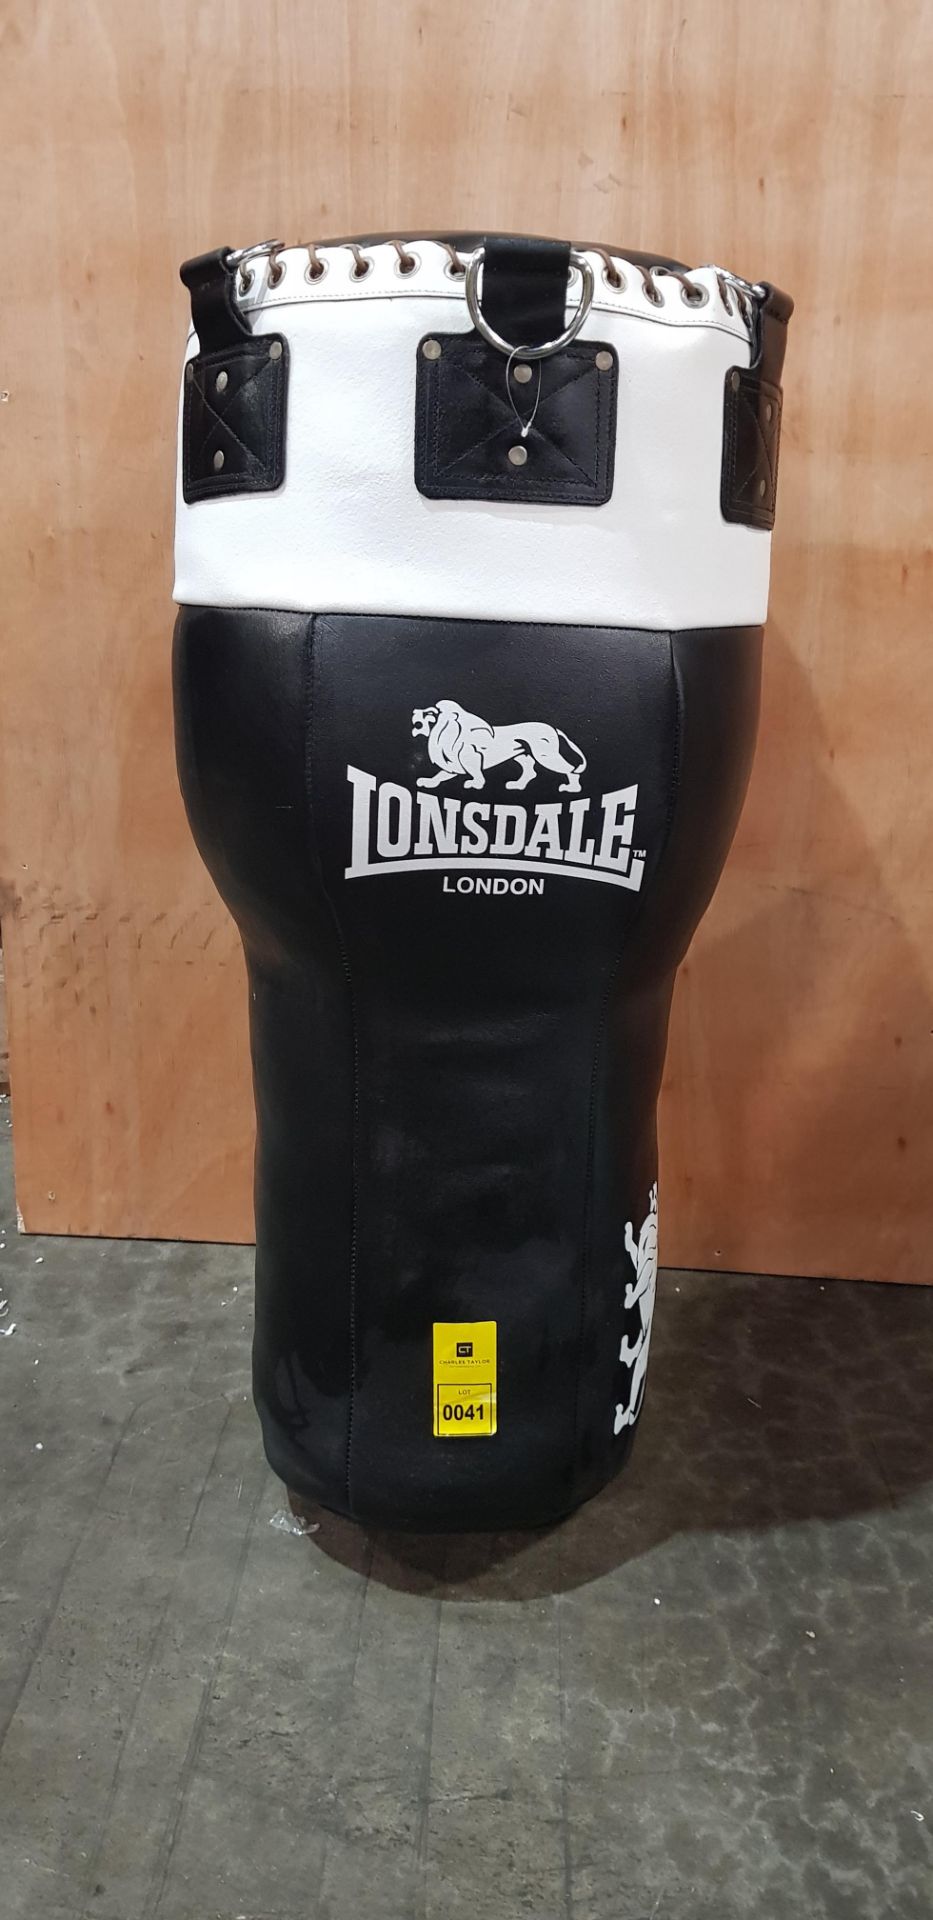 1 X LONSDALE LEATHER ANGLED PUNCH BAG - 32 KG - IN BLACK AND WHITE - (PLEASE NOTE SOME SCUFFS AND